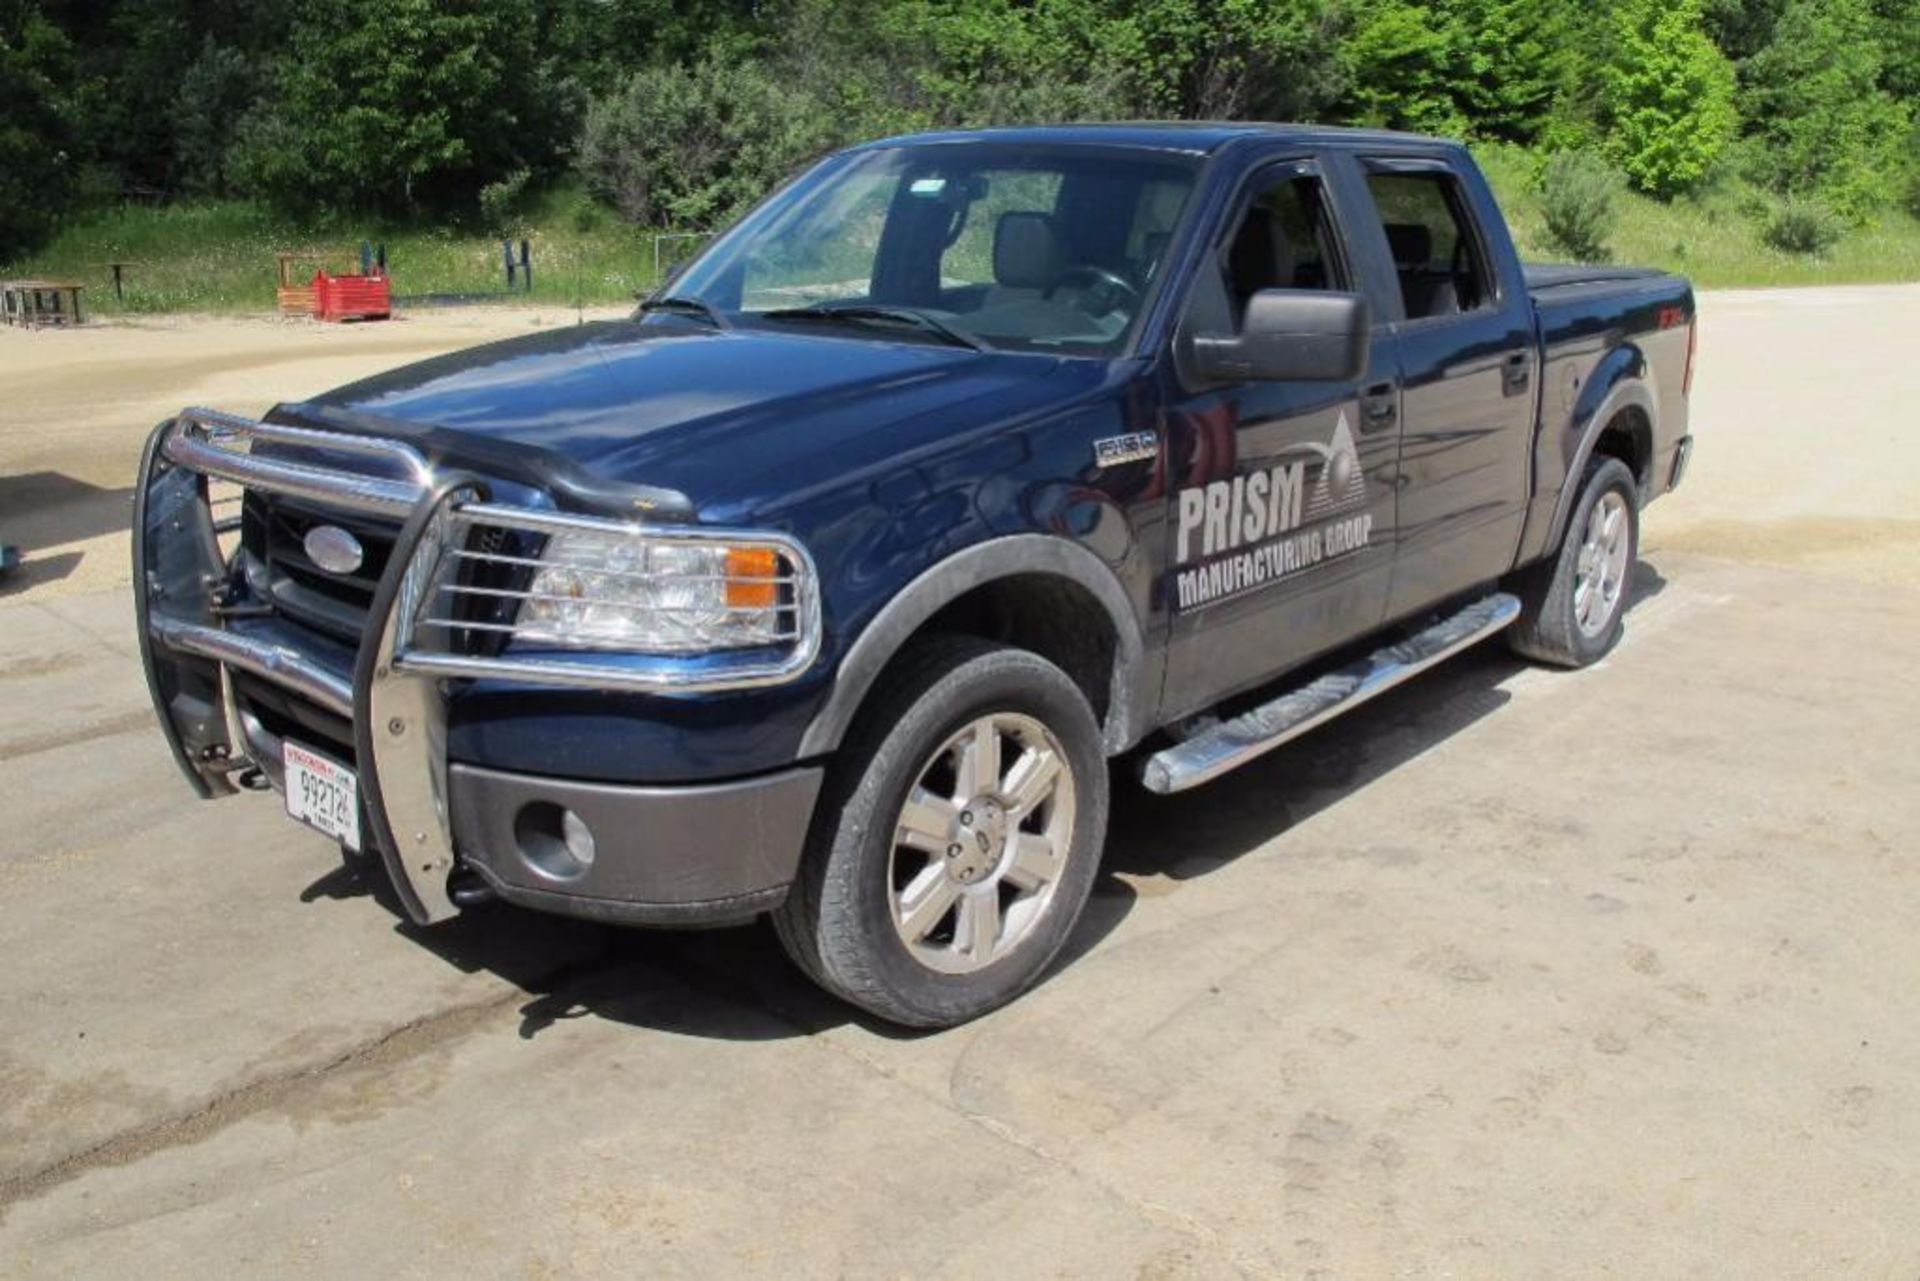 (2007) Ford 4 x 4 Crew Cab Pickup Truck, 5.4 Triton, FX4 Off-road, Short Box with Soft Cover, Brush